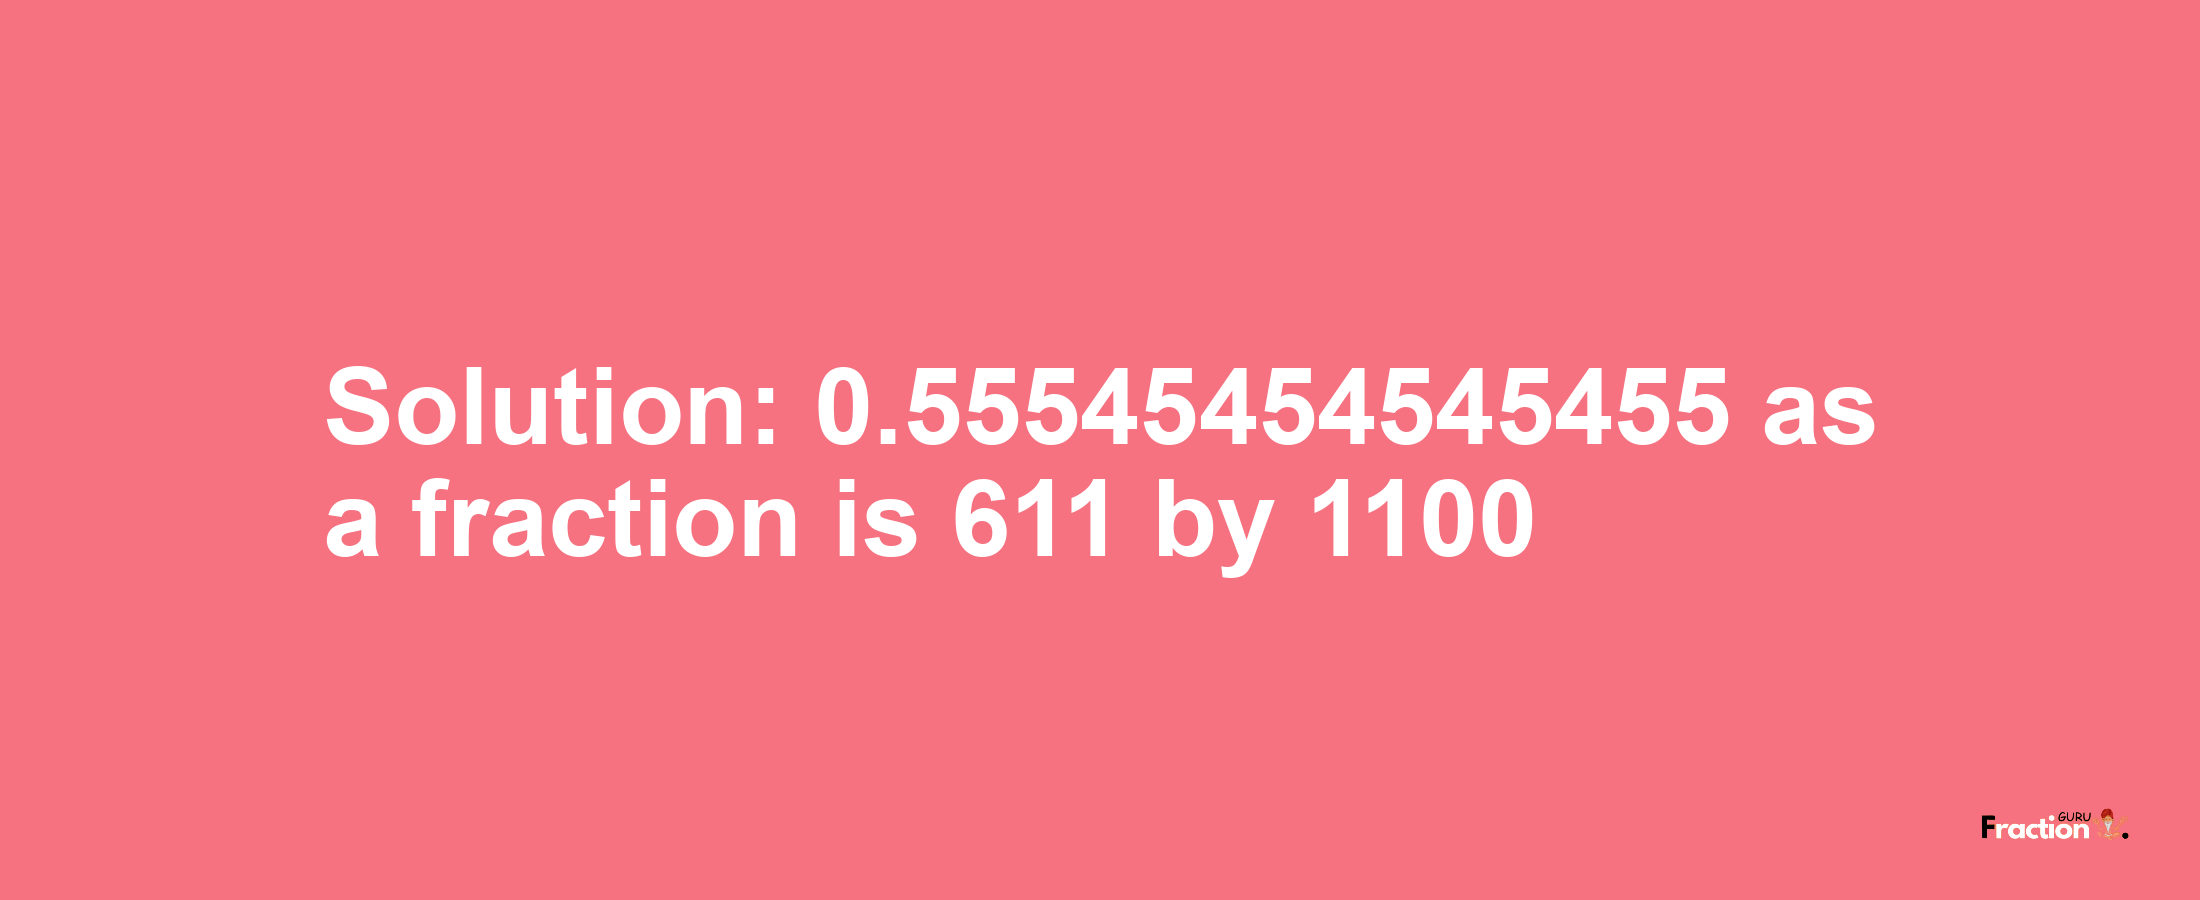 Solution:0.55545454545455 as a fraction is 611/1100